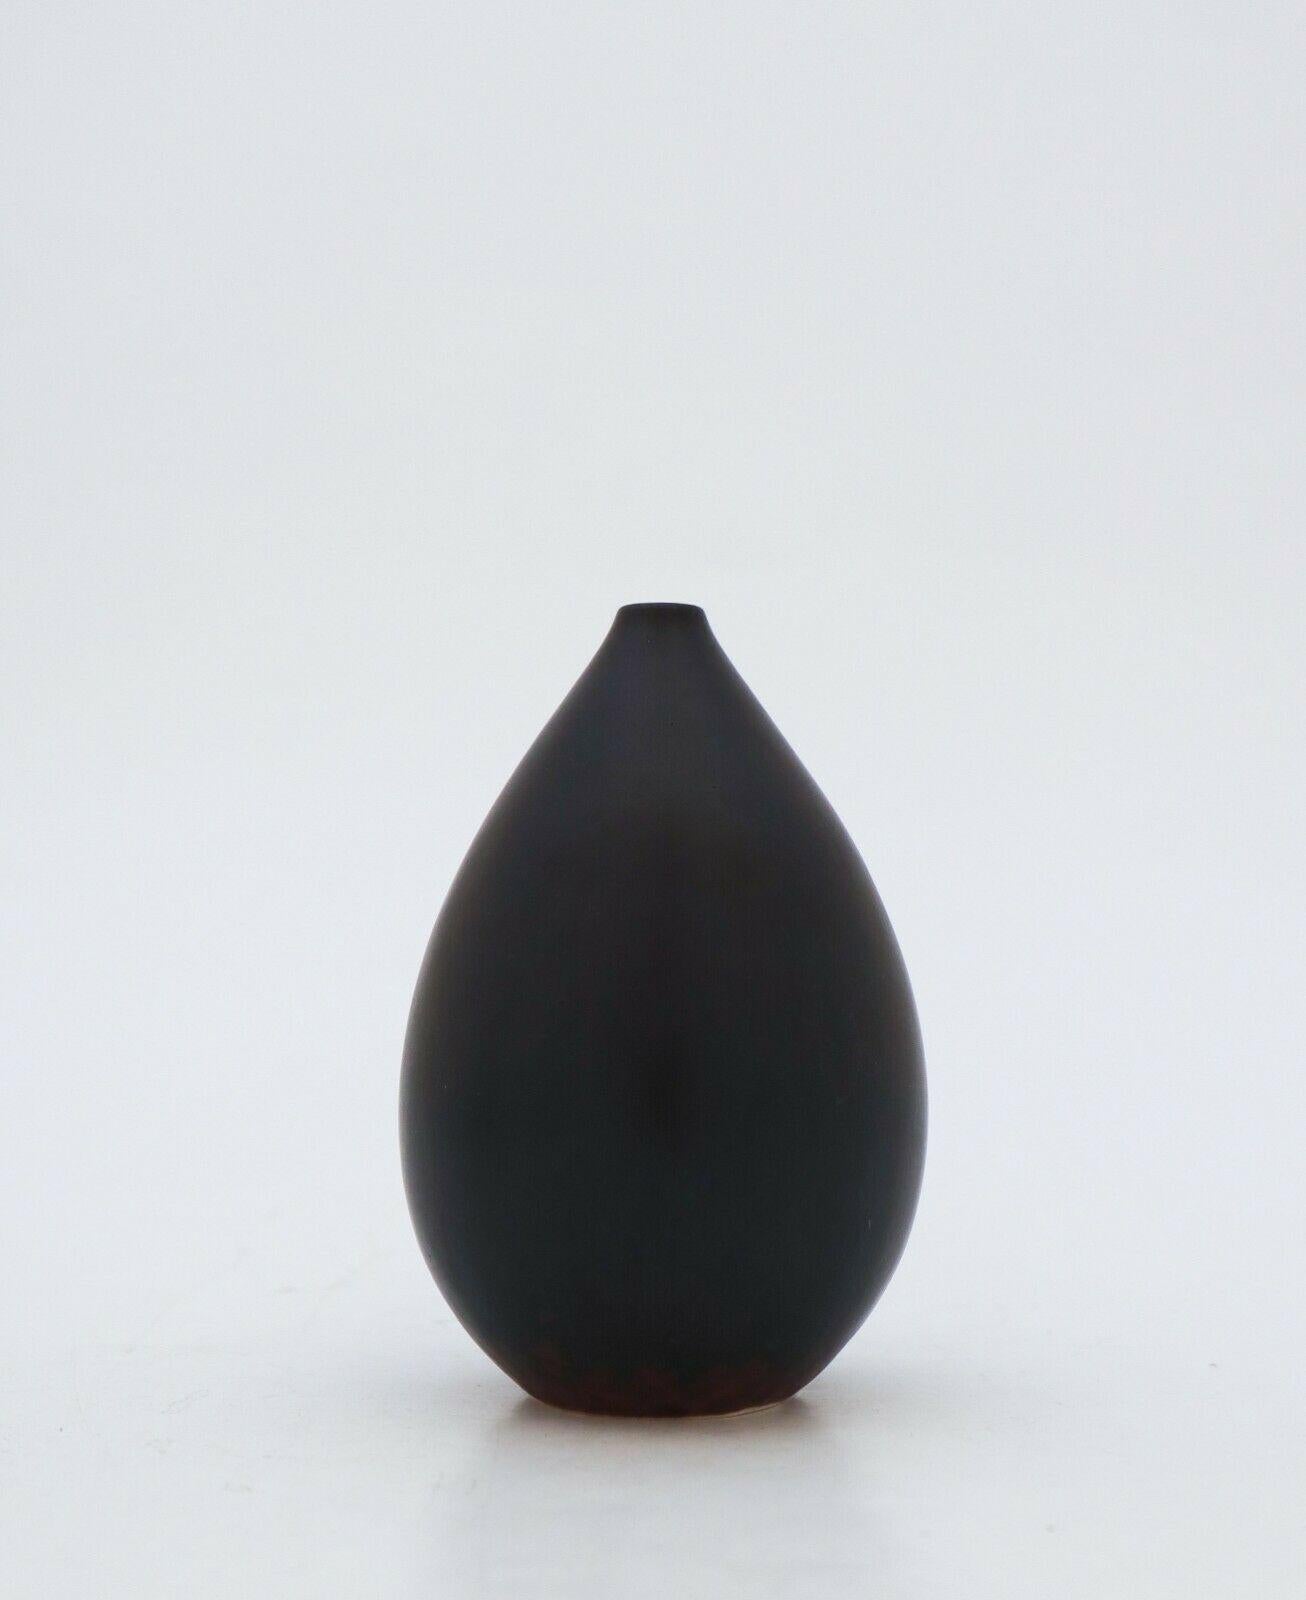 A black vintage vase designed by Carl-Harry Stålhane at Rörstrand in the 20th midcentury, it´s 10 cm high and in mint condition. It is marked as 1st quality. 

Carl-Harry Stålhane is one of the top names when it comes to Mid century Scandinavian